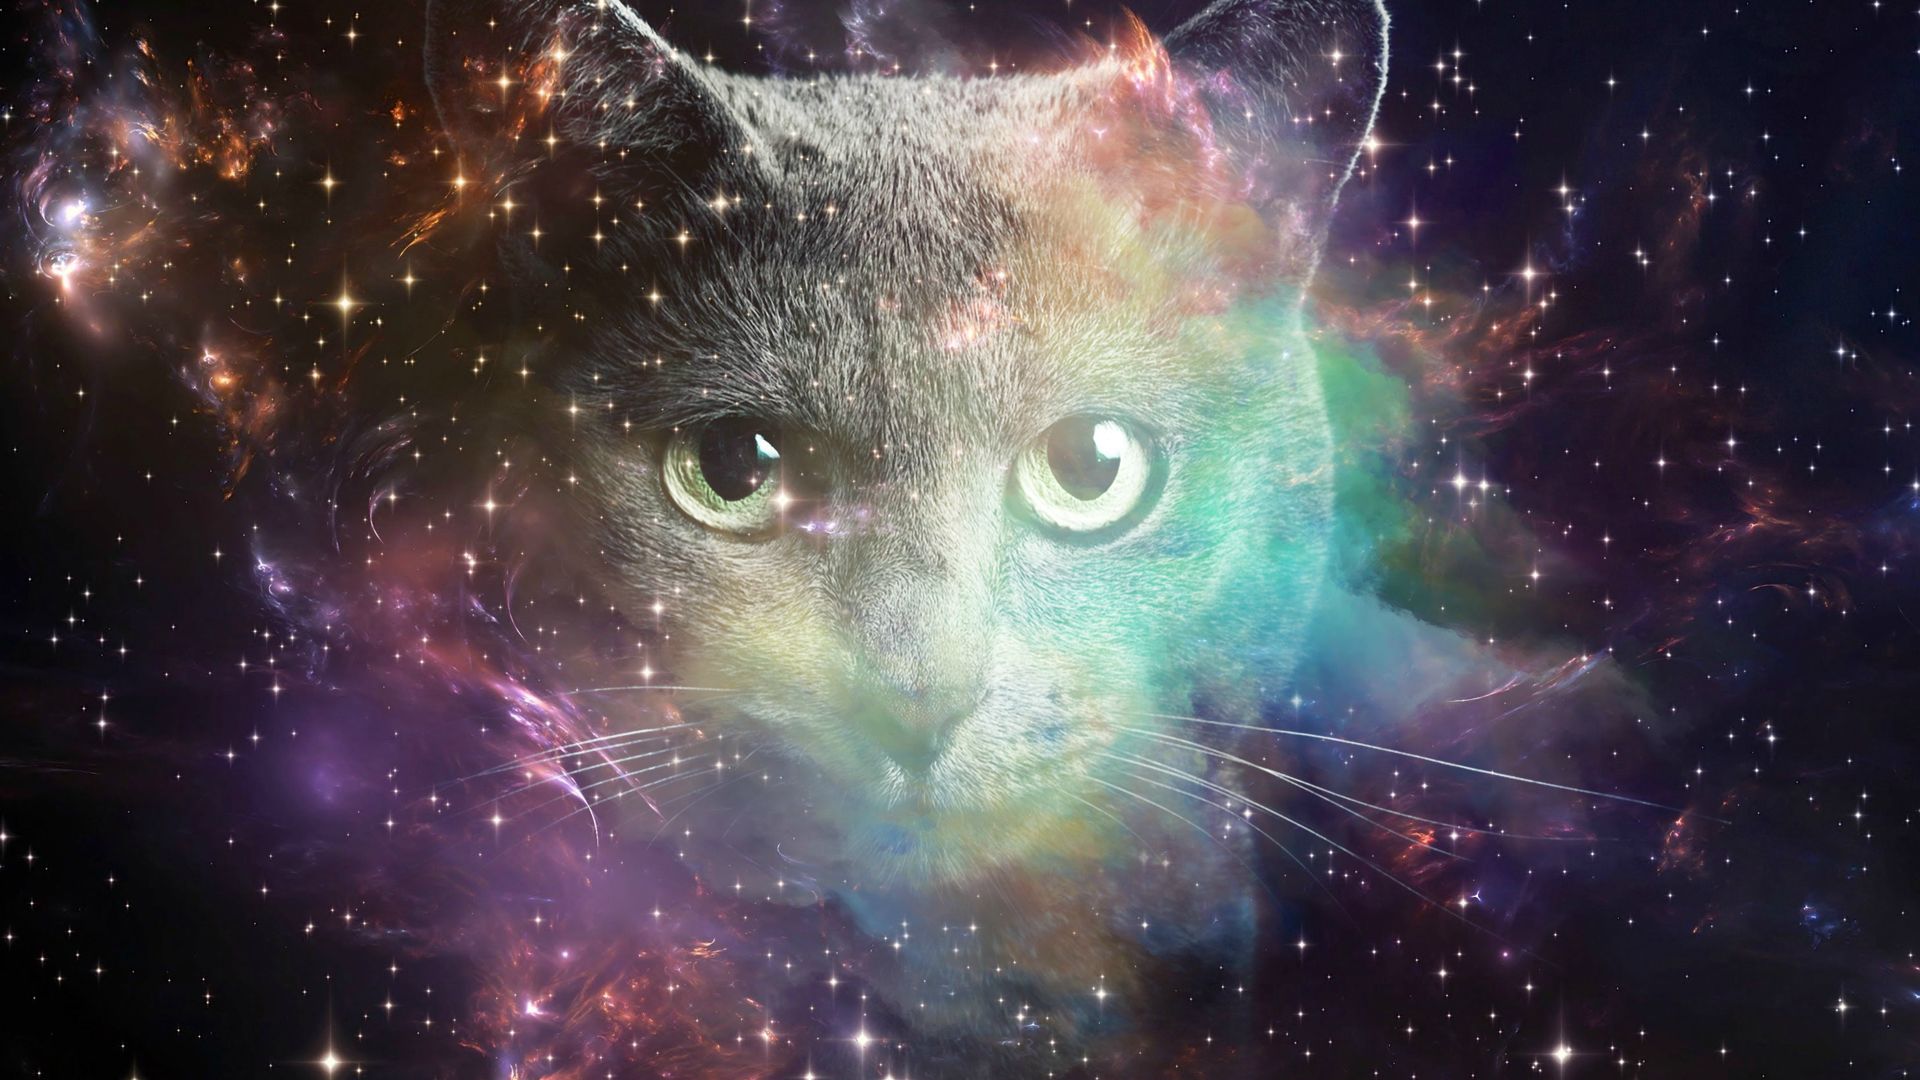 Space Cat Wallpaper, HD Space Cat Background on WallpaperBat